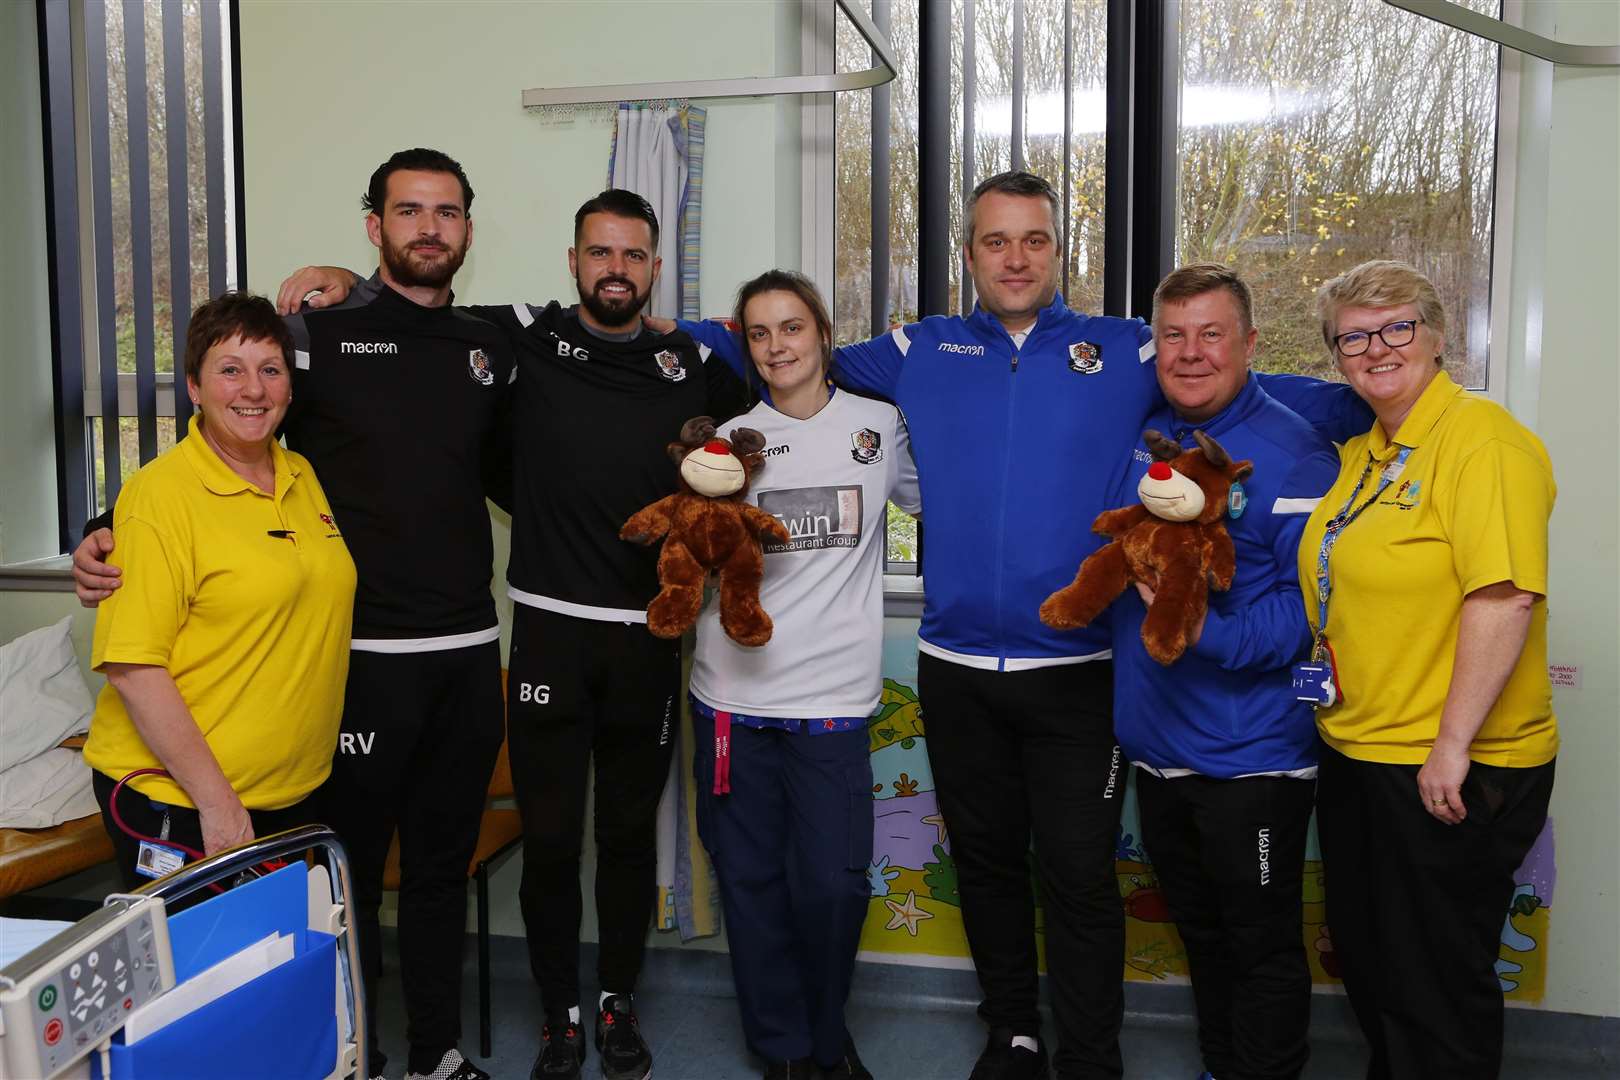 Play specialist Sharon Samuels, Ronnie Vint, Ben Greenhalgh, ward sister Jade Gavin, Adam Flanagan, Terry Groom and play specialist Donna Day. Picture: Andy Jones